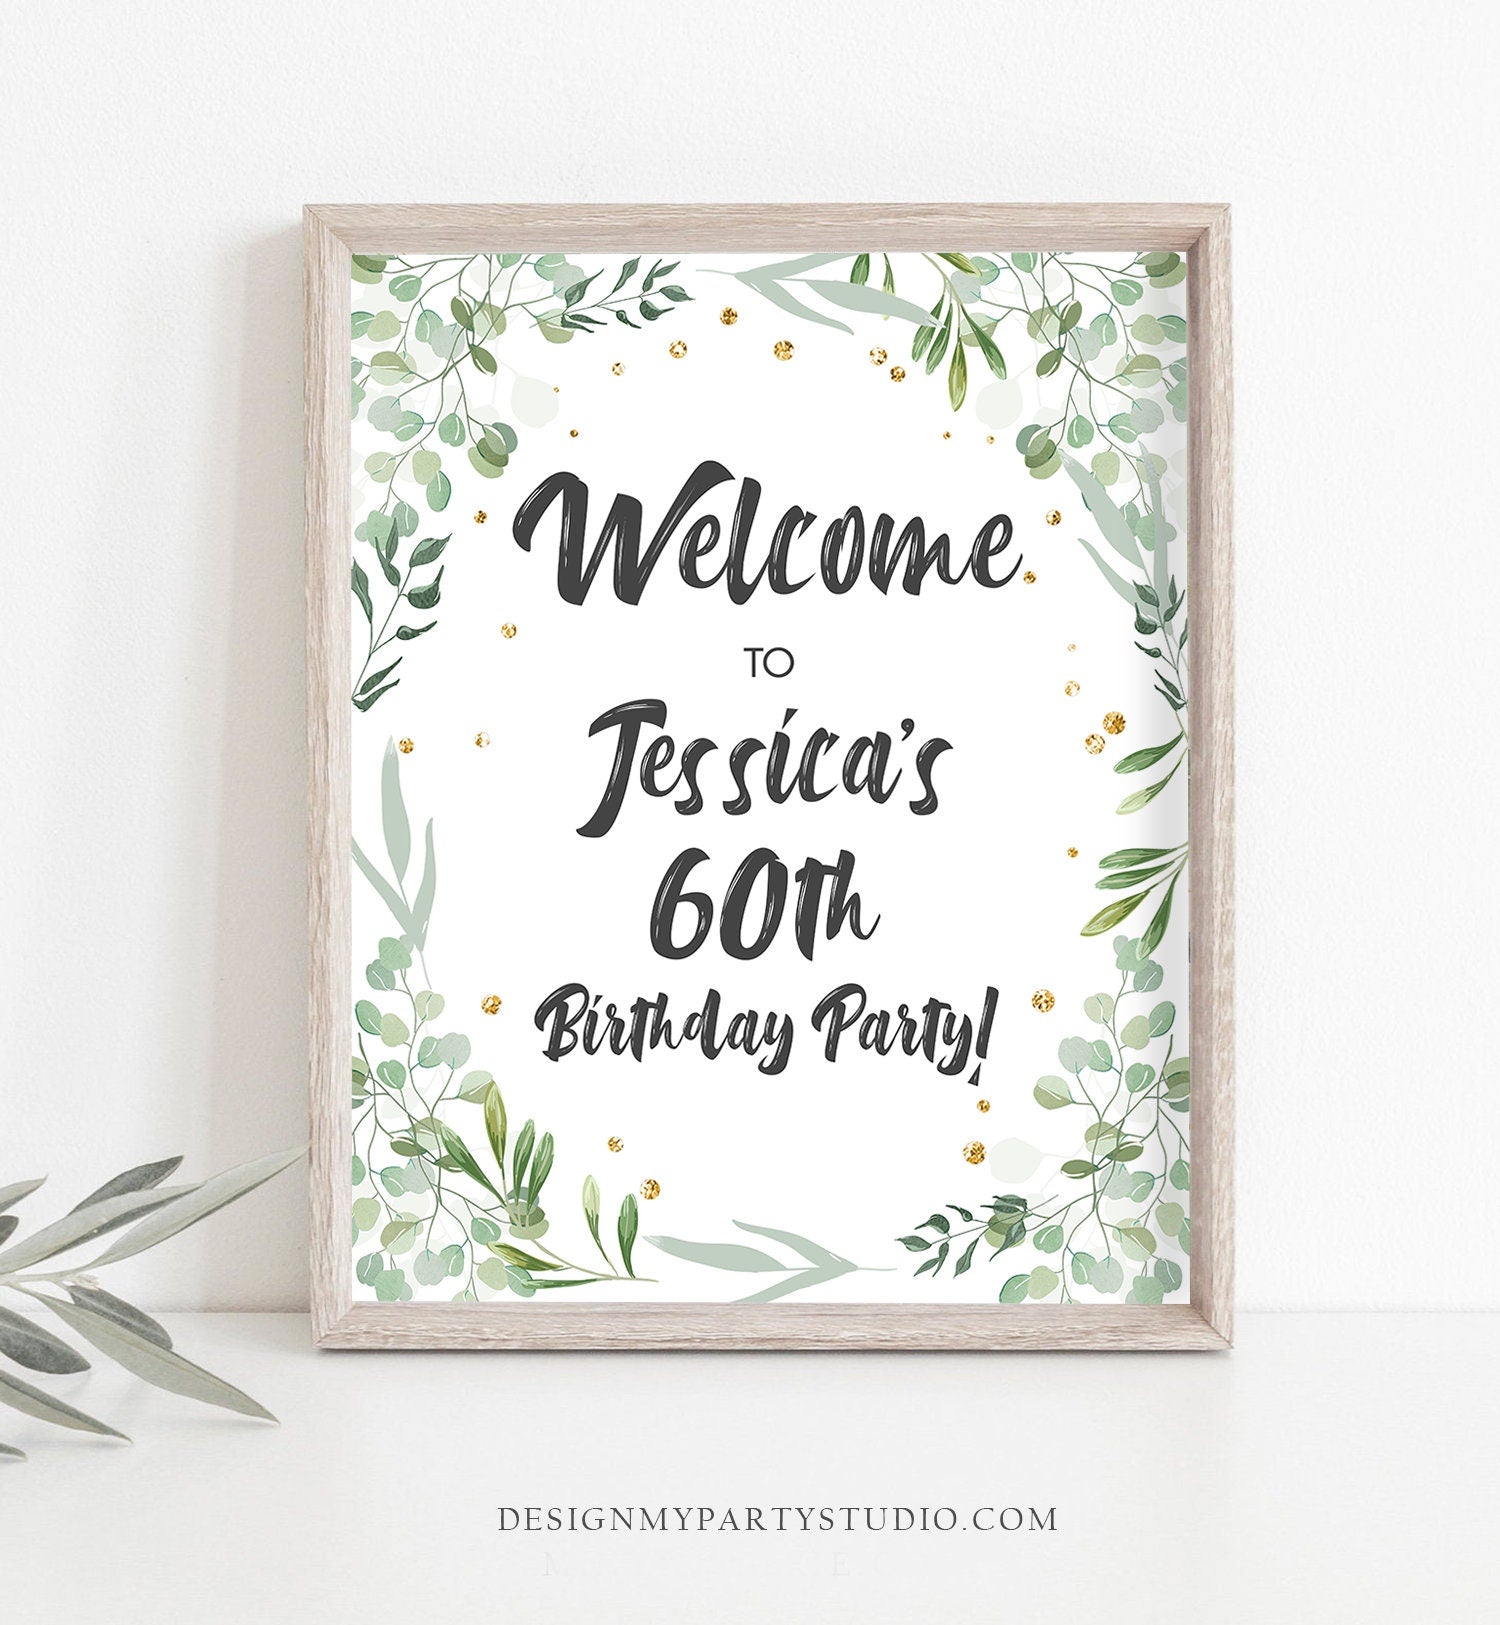 Editable Greenery Birthday Welcome Sign Adult ANY AGE 60th Birthday Party Rustic Bridal Shower Wedding Gold Corjl Template Printable 0253